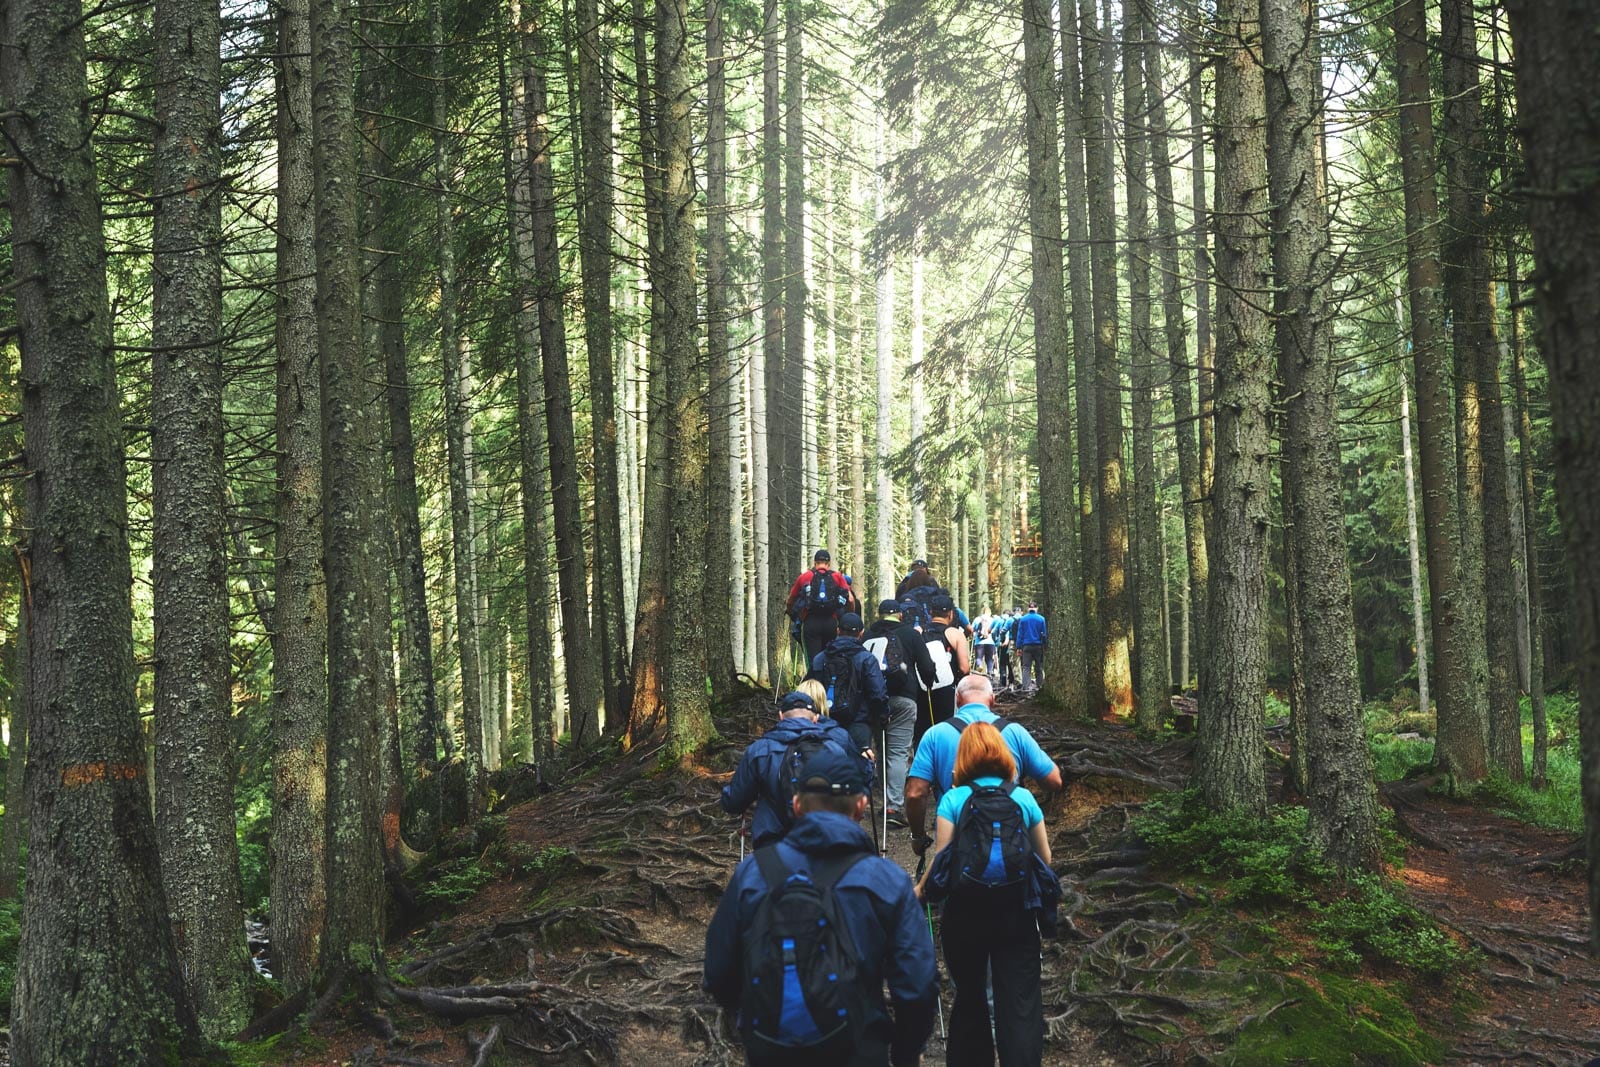 A group of people hiking through a forest.